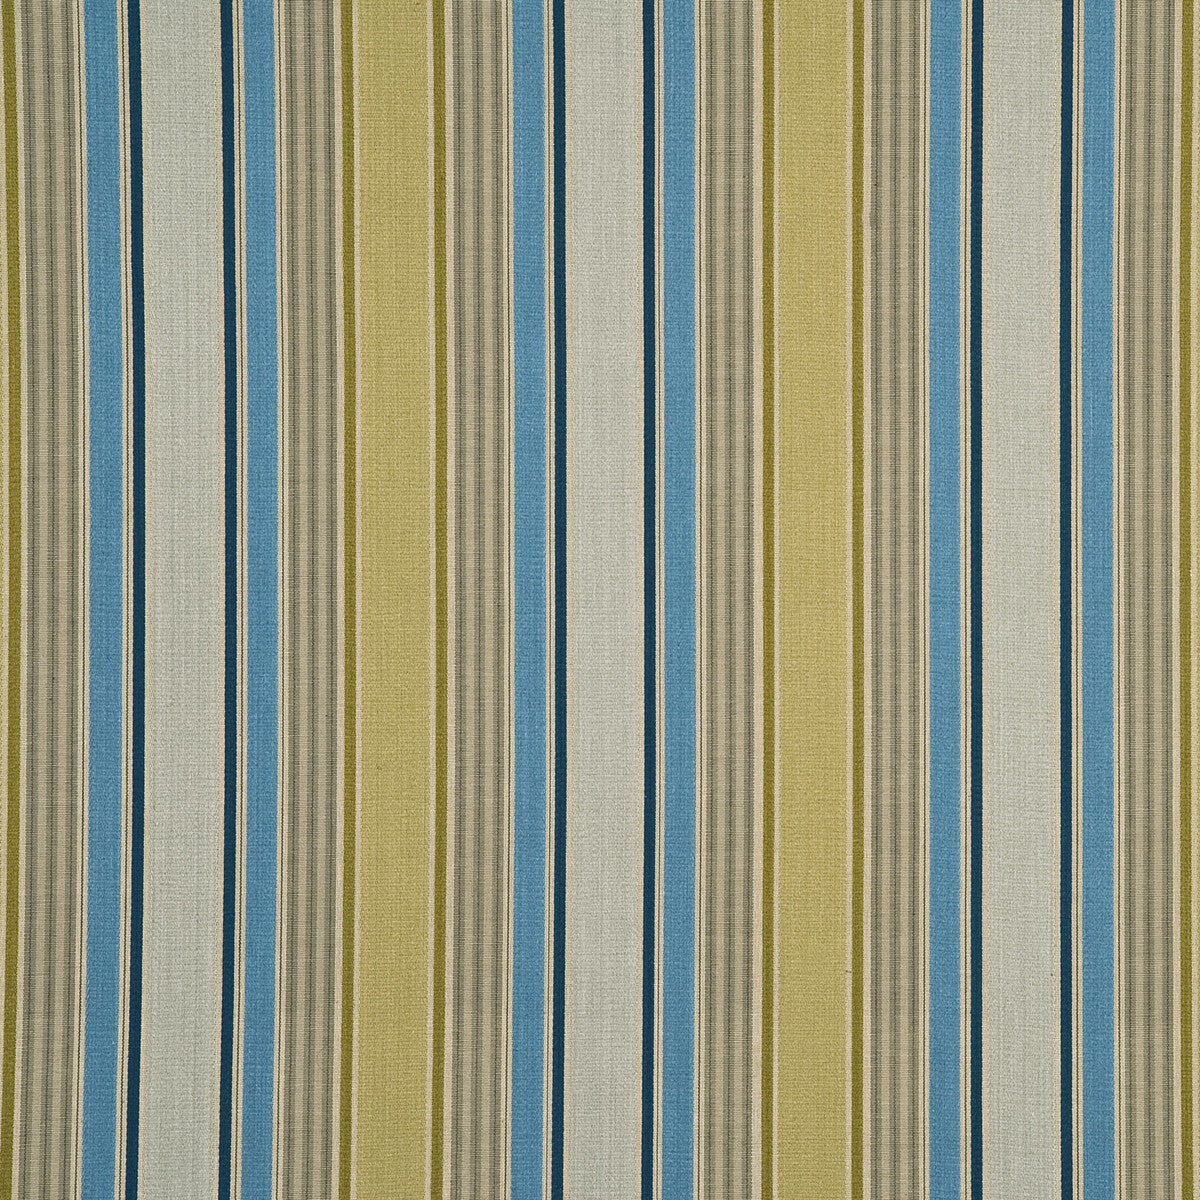 Arley Stripe fabric in teal/green color - pattern BF10401.5.0 - by G P &amp; J Baker in the Holcott collection